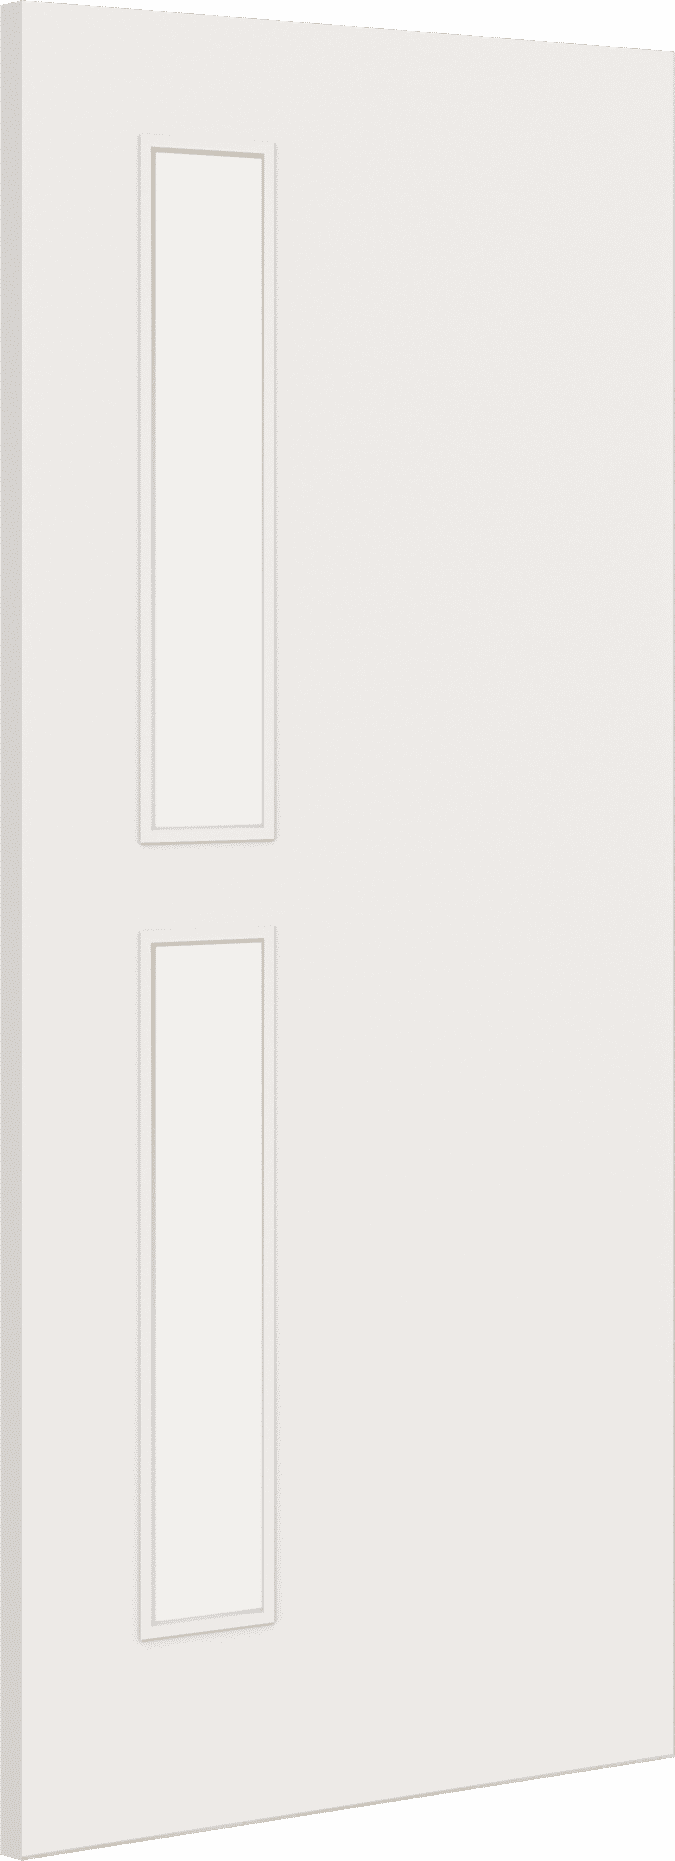 1981mm x 838mm x 44mm (33") Architectural Paint Grade White 07 Clear Glazed Fire Door Blank